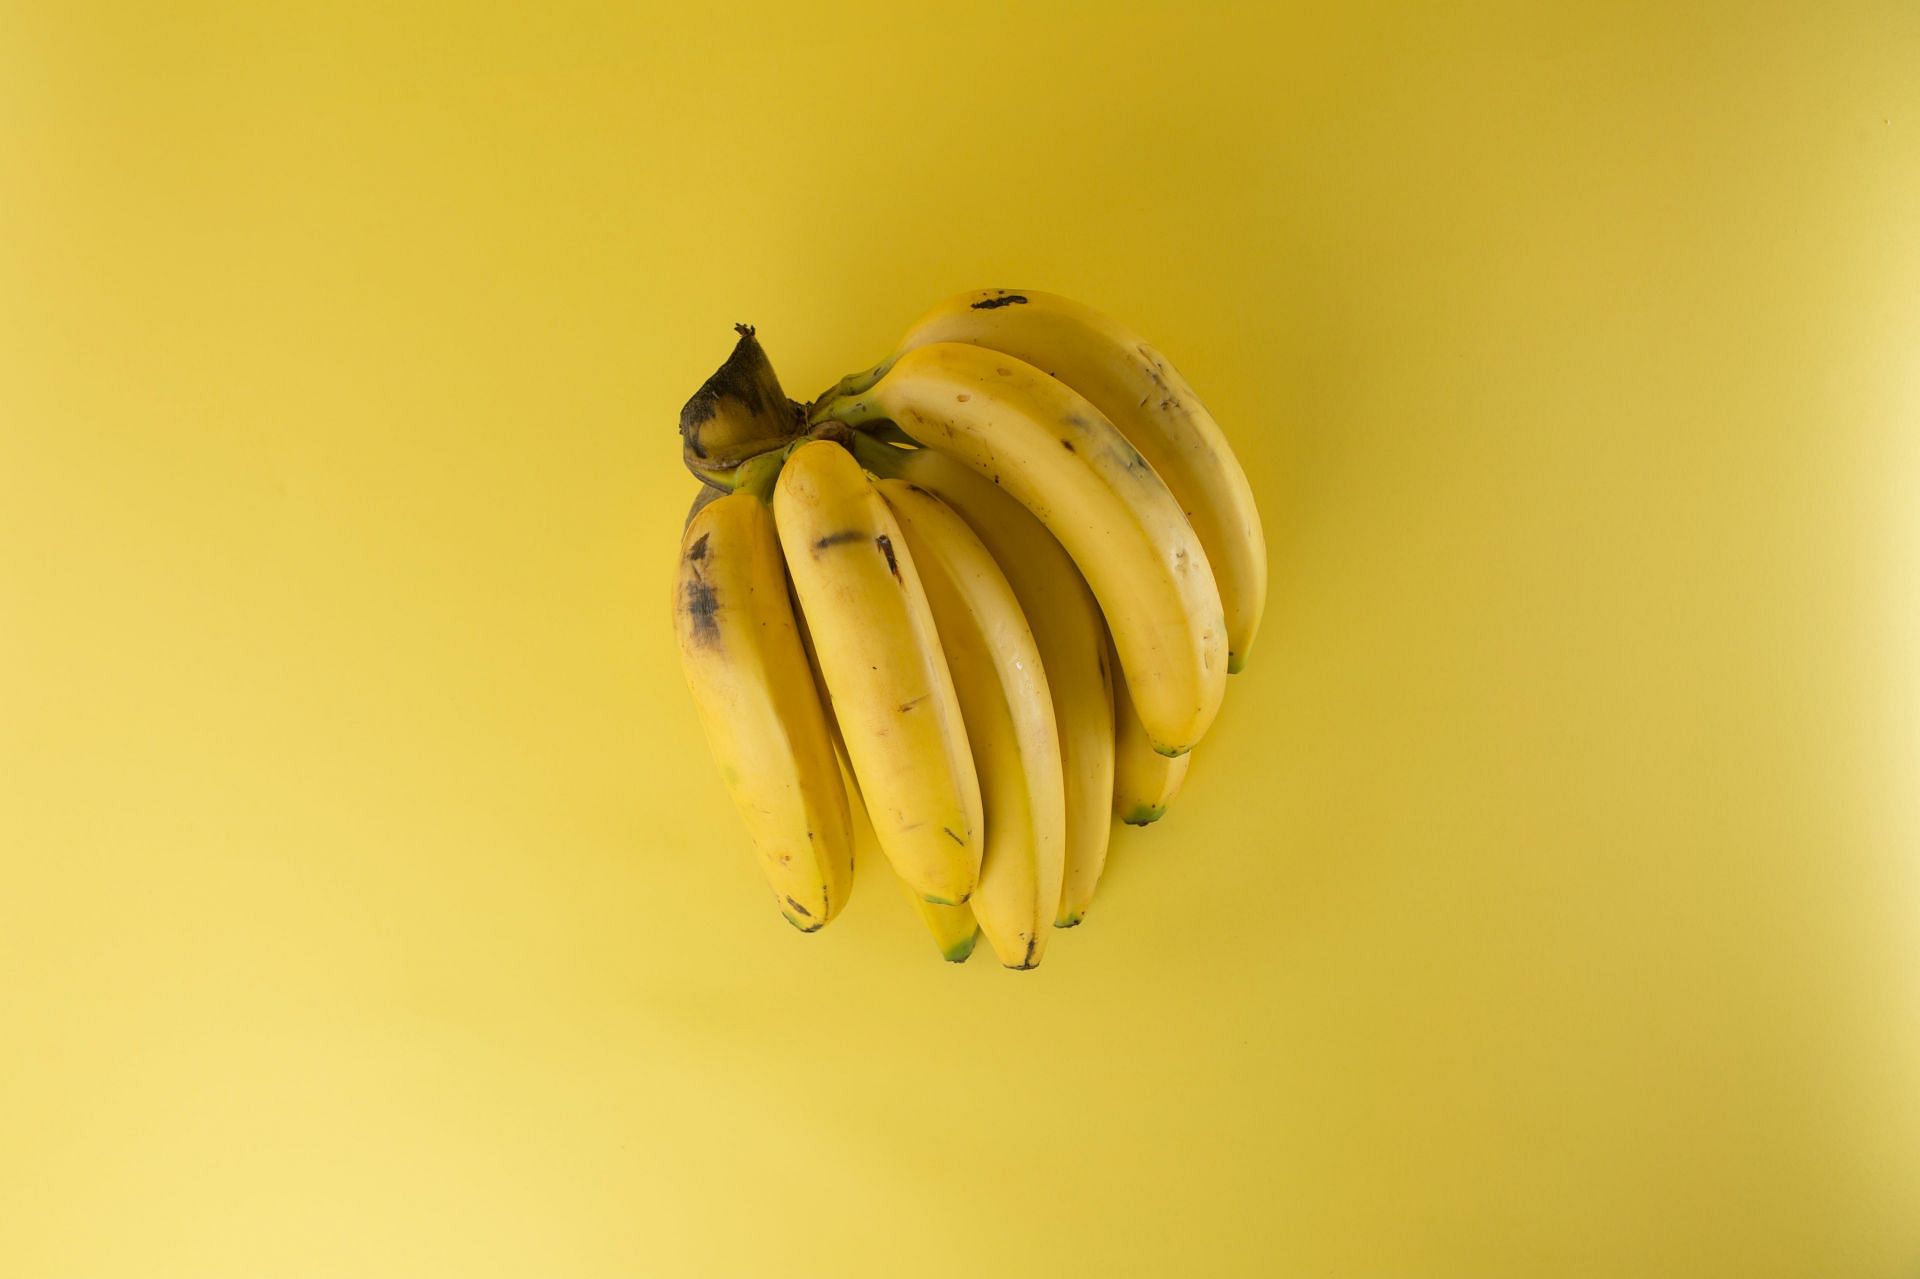 Fruits for empty stomach (Image sourced via Pexels / Photo by salamanca)